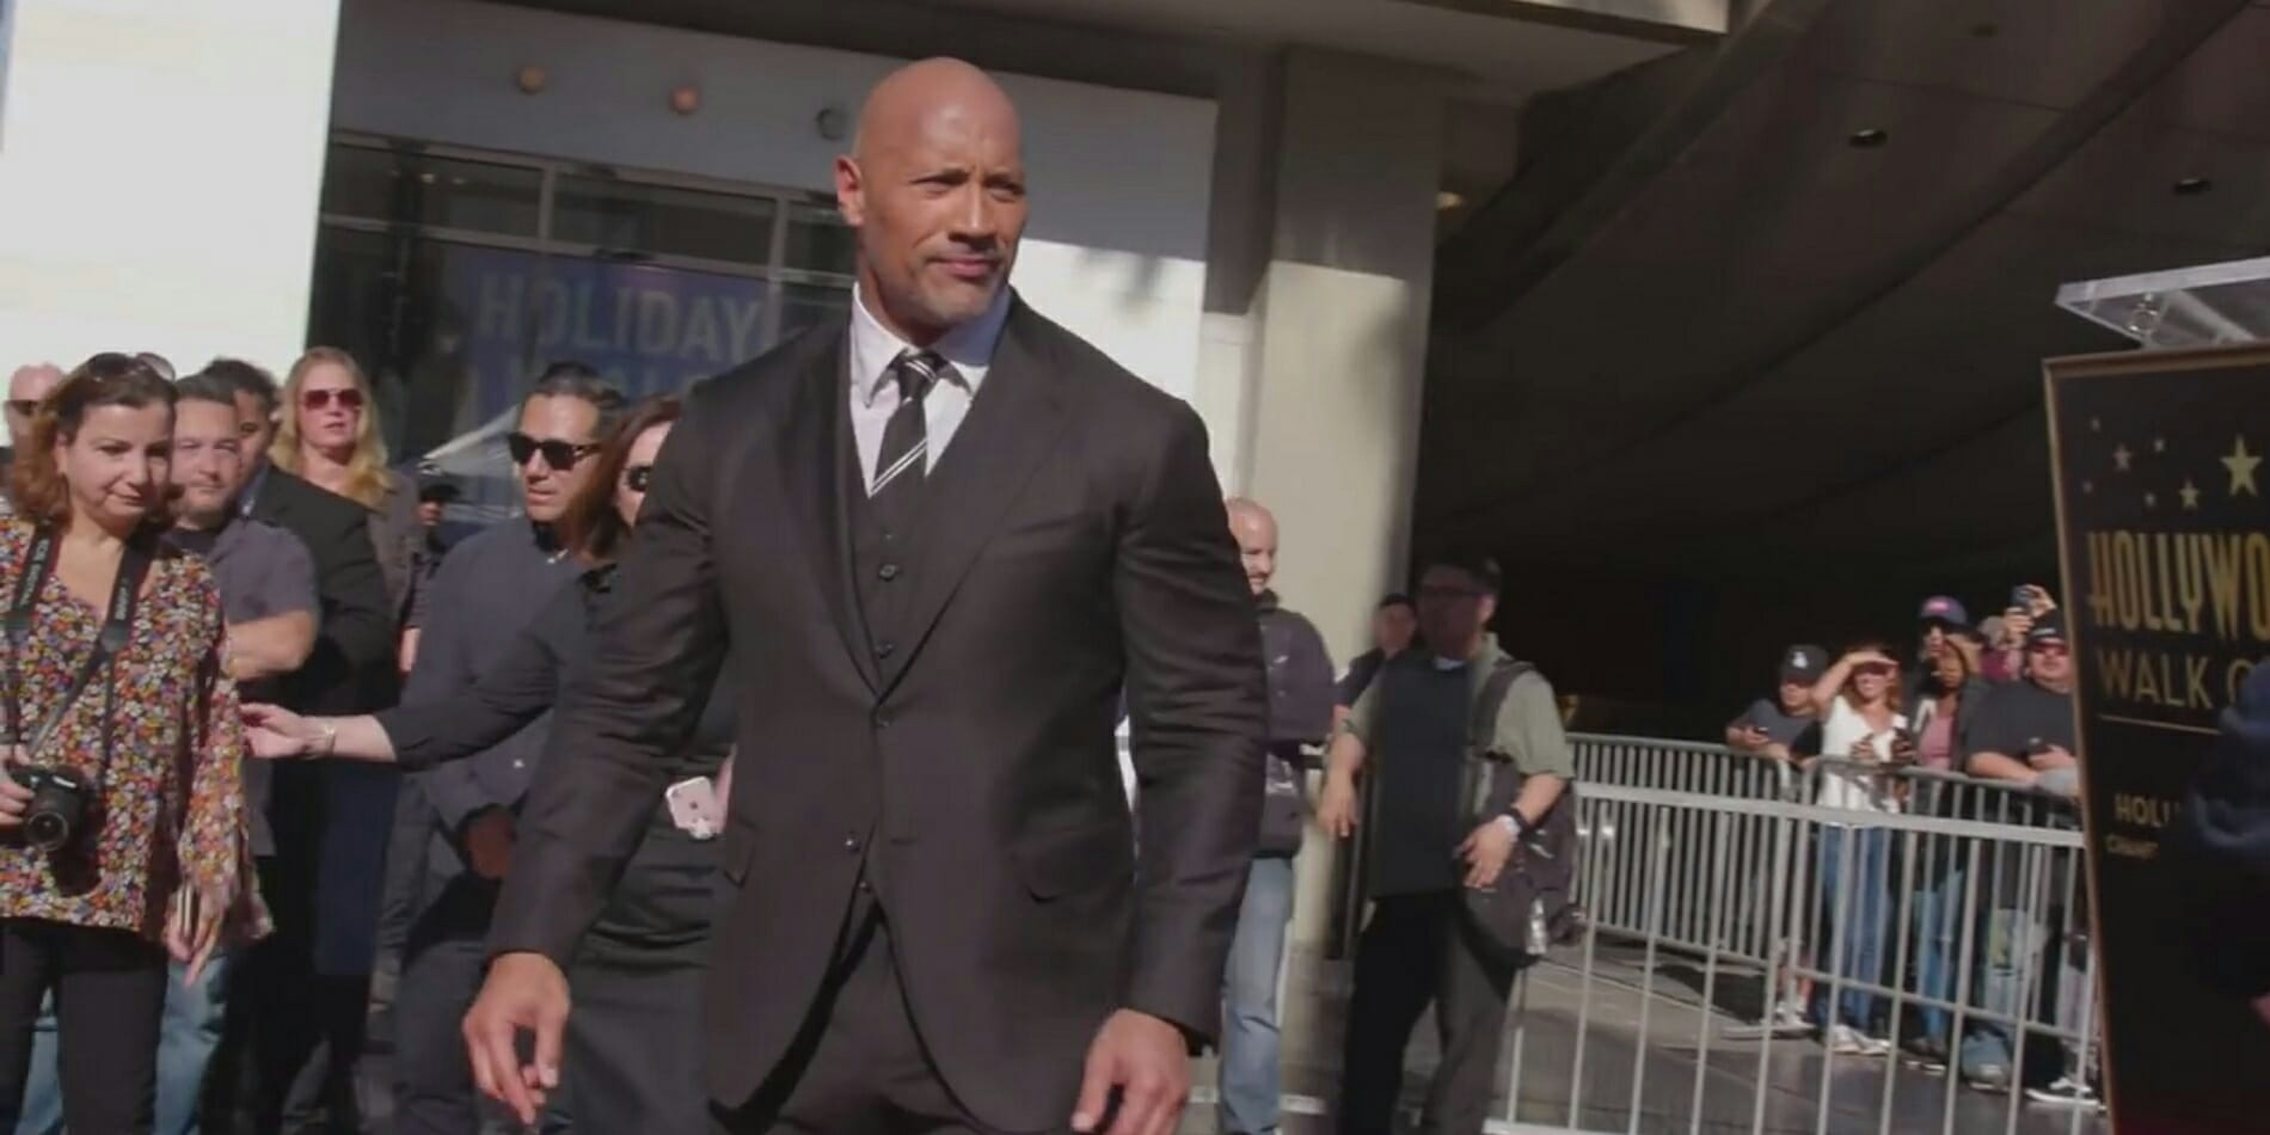 Dwayne Johnson is joining several other men in protesting sexual harassment at the Golden Globes by wearing black.